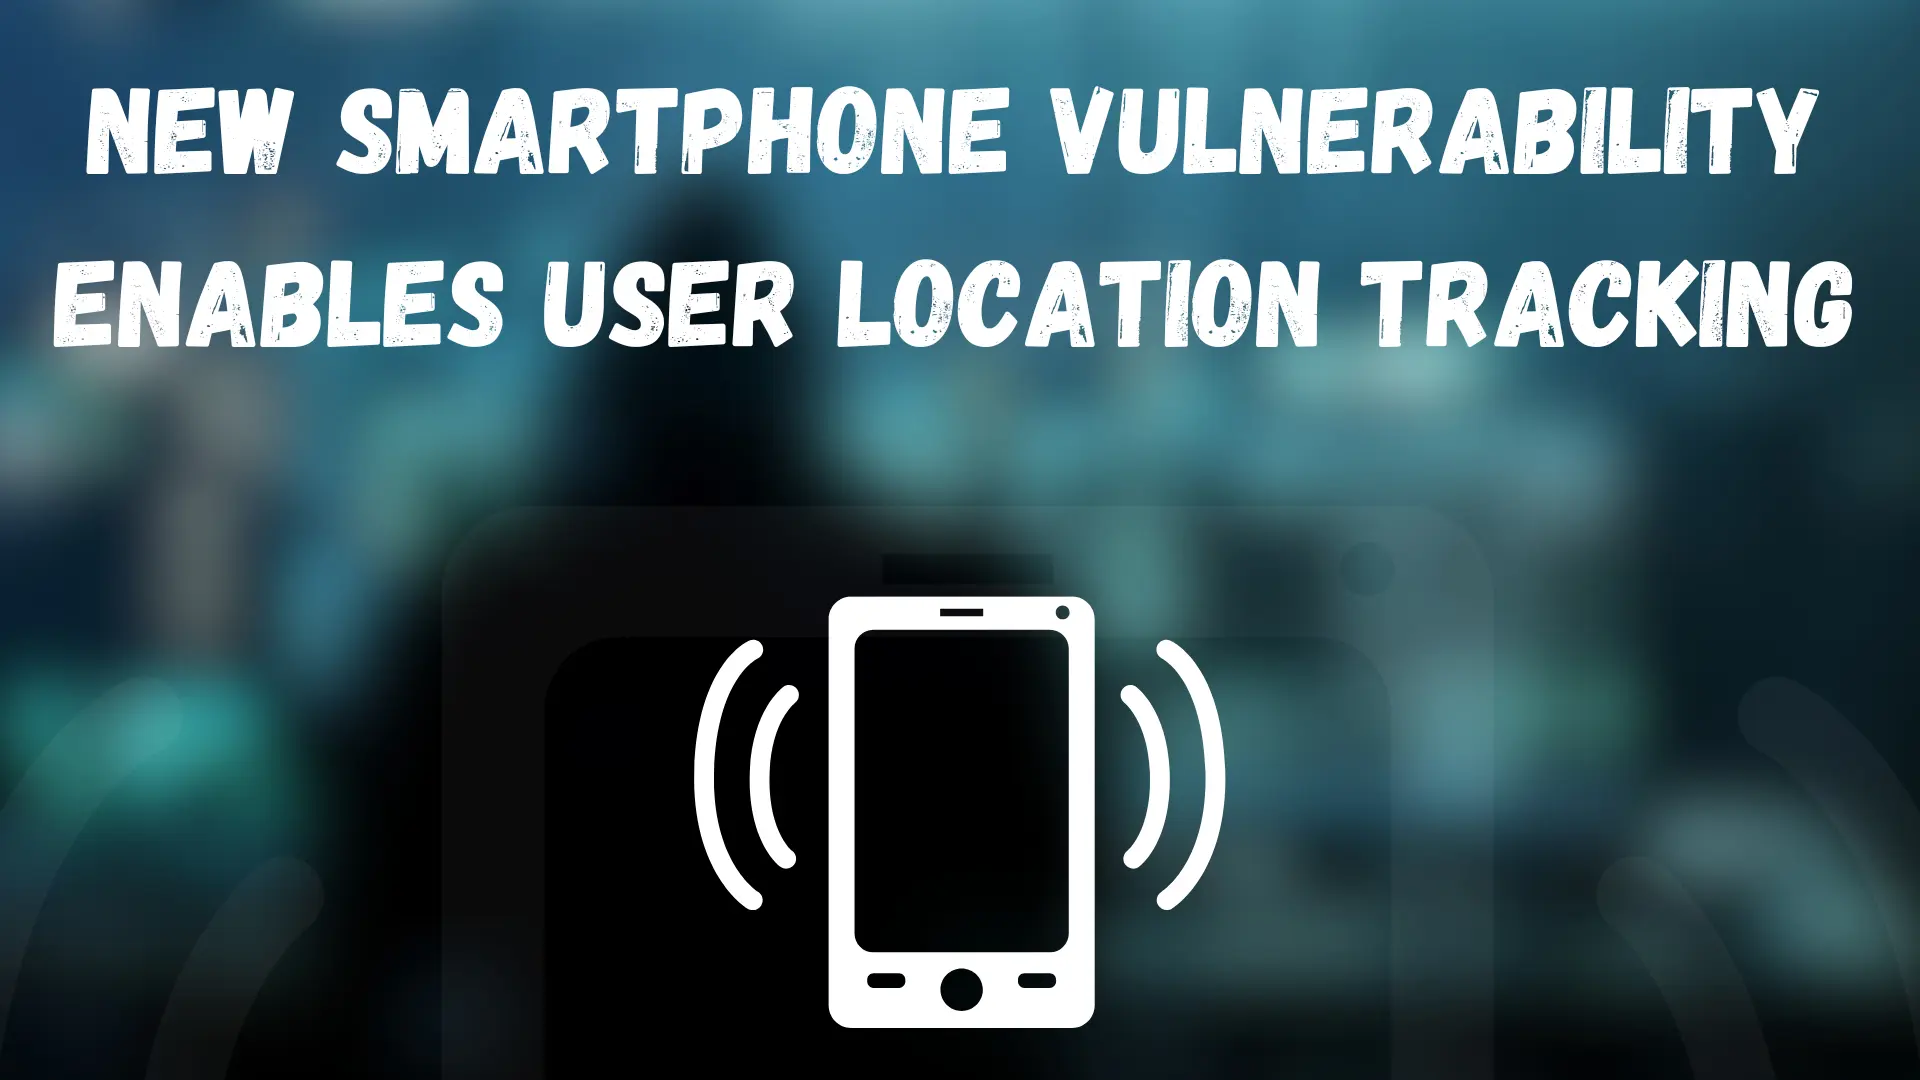 New Smartphone Vulnerability Enables User Location Tracking